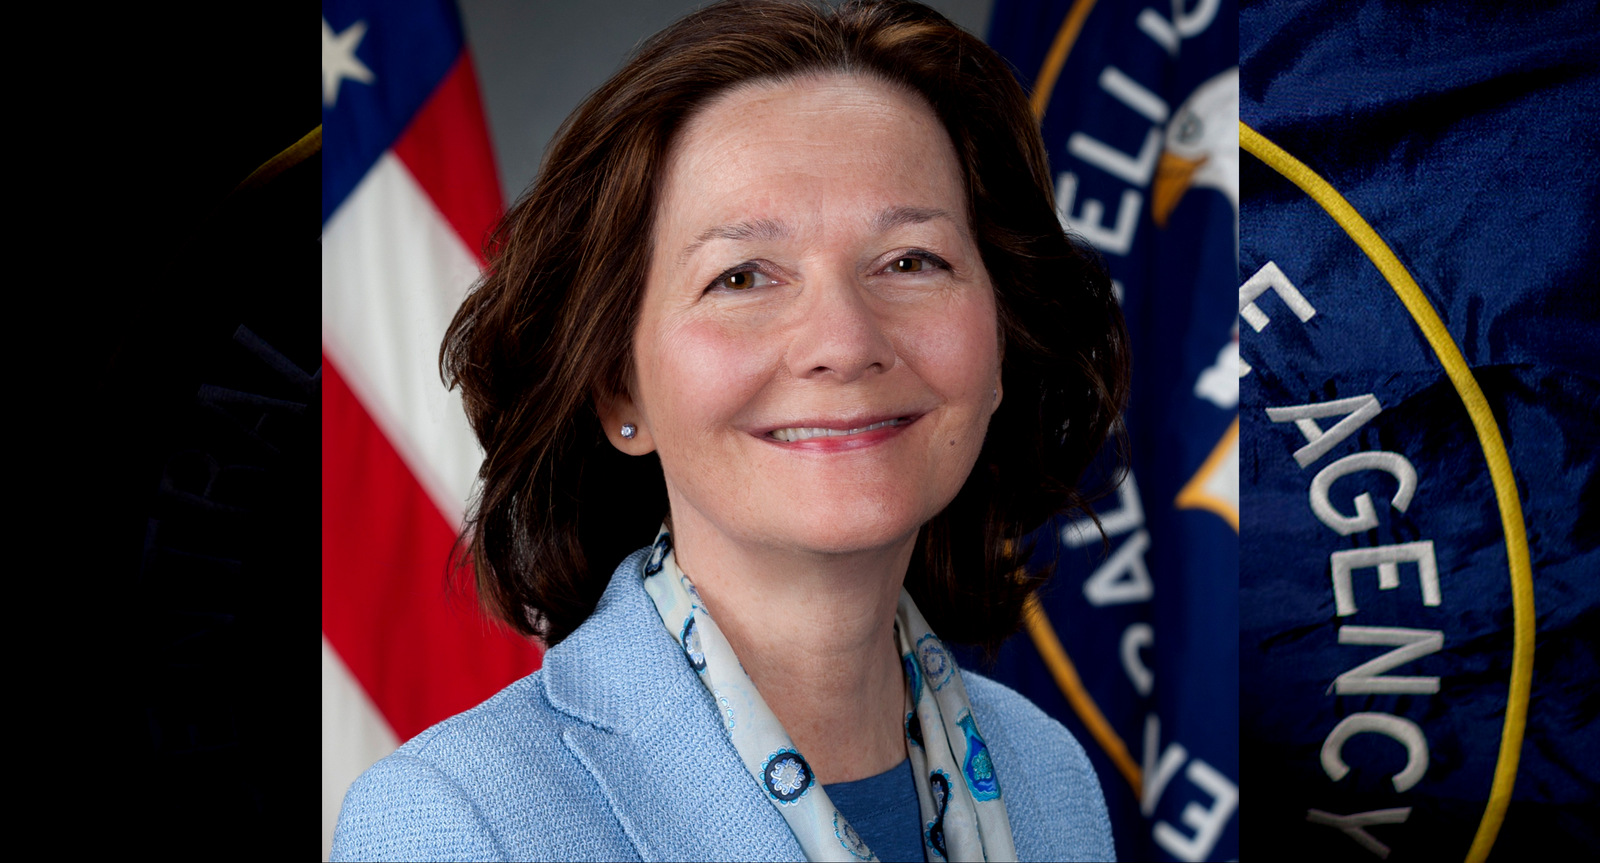 This March 21, 2017, photo provided by the CIA, shows CIA Deputy Director Gina Haspel. Haspel, who joined the CIA in 1985, has been chief of station at CIA outposts abroad and led both CIA torture programs and secret prisons. (CIA via AP)